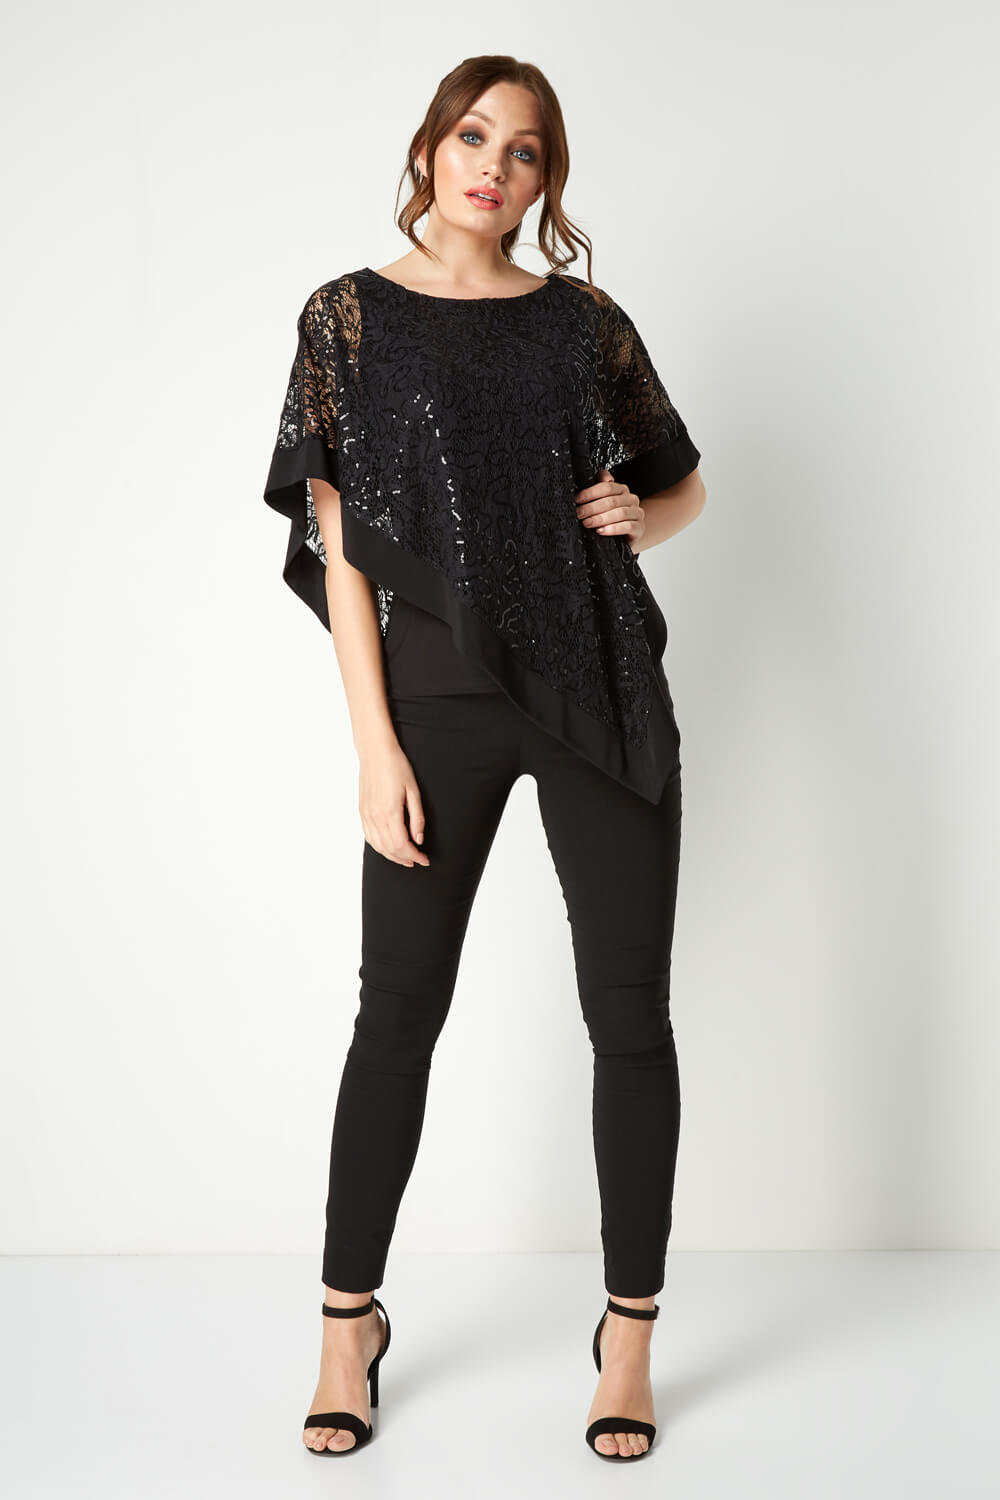 Black Sequin Lace Overlay Top, Image 2 of 4